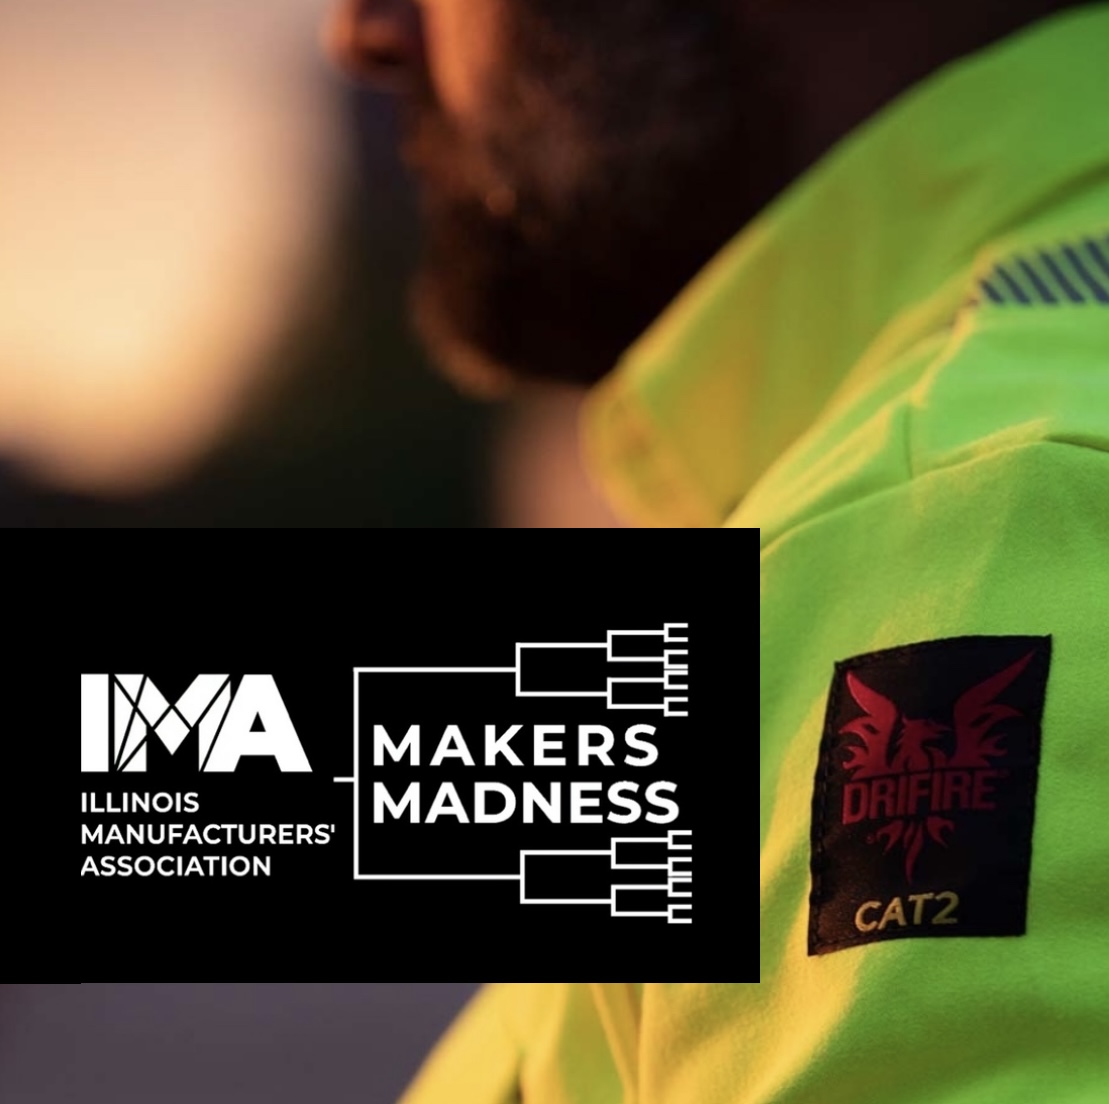 DRIFIRE FR Garments bring the heat when they're up against some of the coolest products made in Illinois! Pick us for your Makers Madness bracket and cast your vote for DRIFIRE Hi-Vis FR Work Wear by visiting makersmadnessil.com #MakersMadnessIL